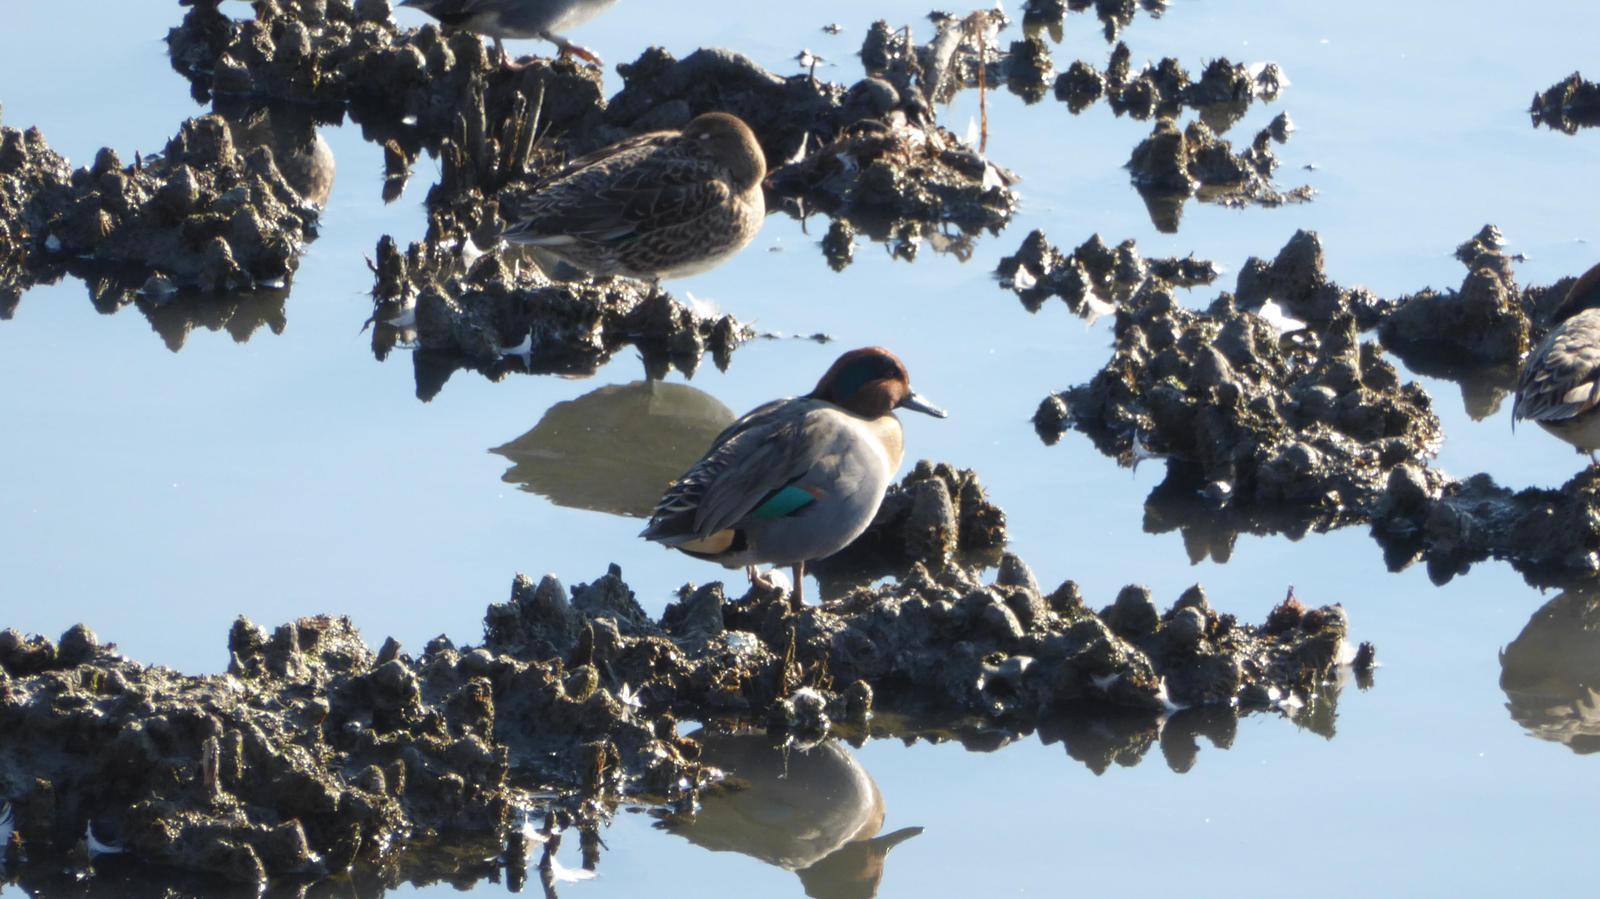 Green-winged Teal Photo by Daliel Leite